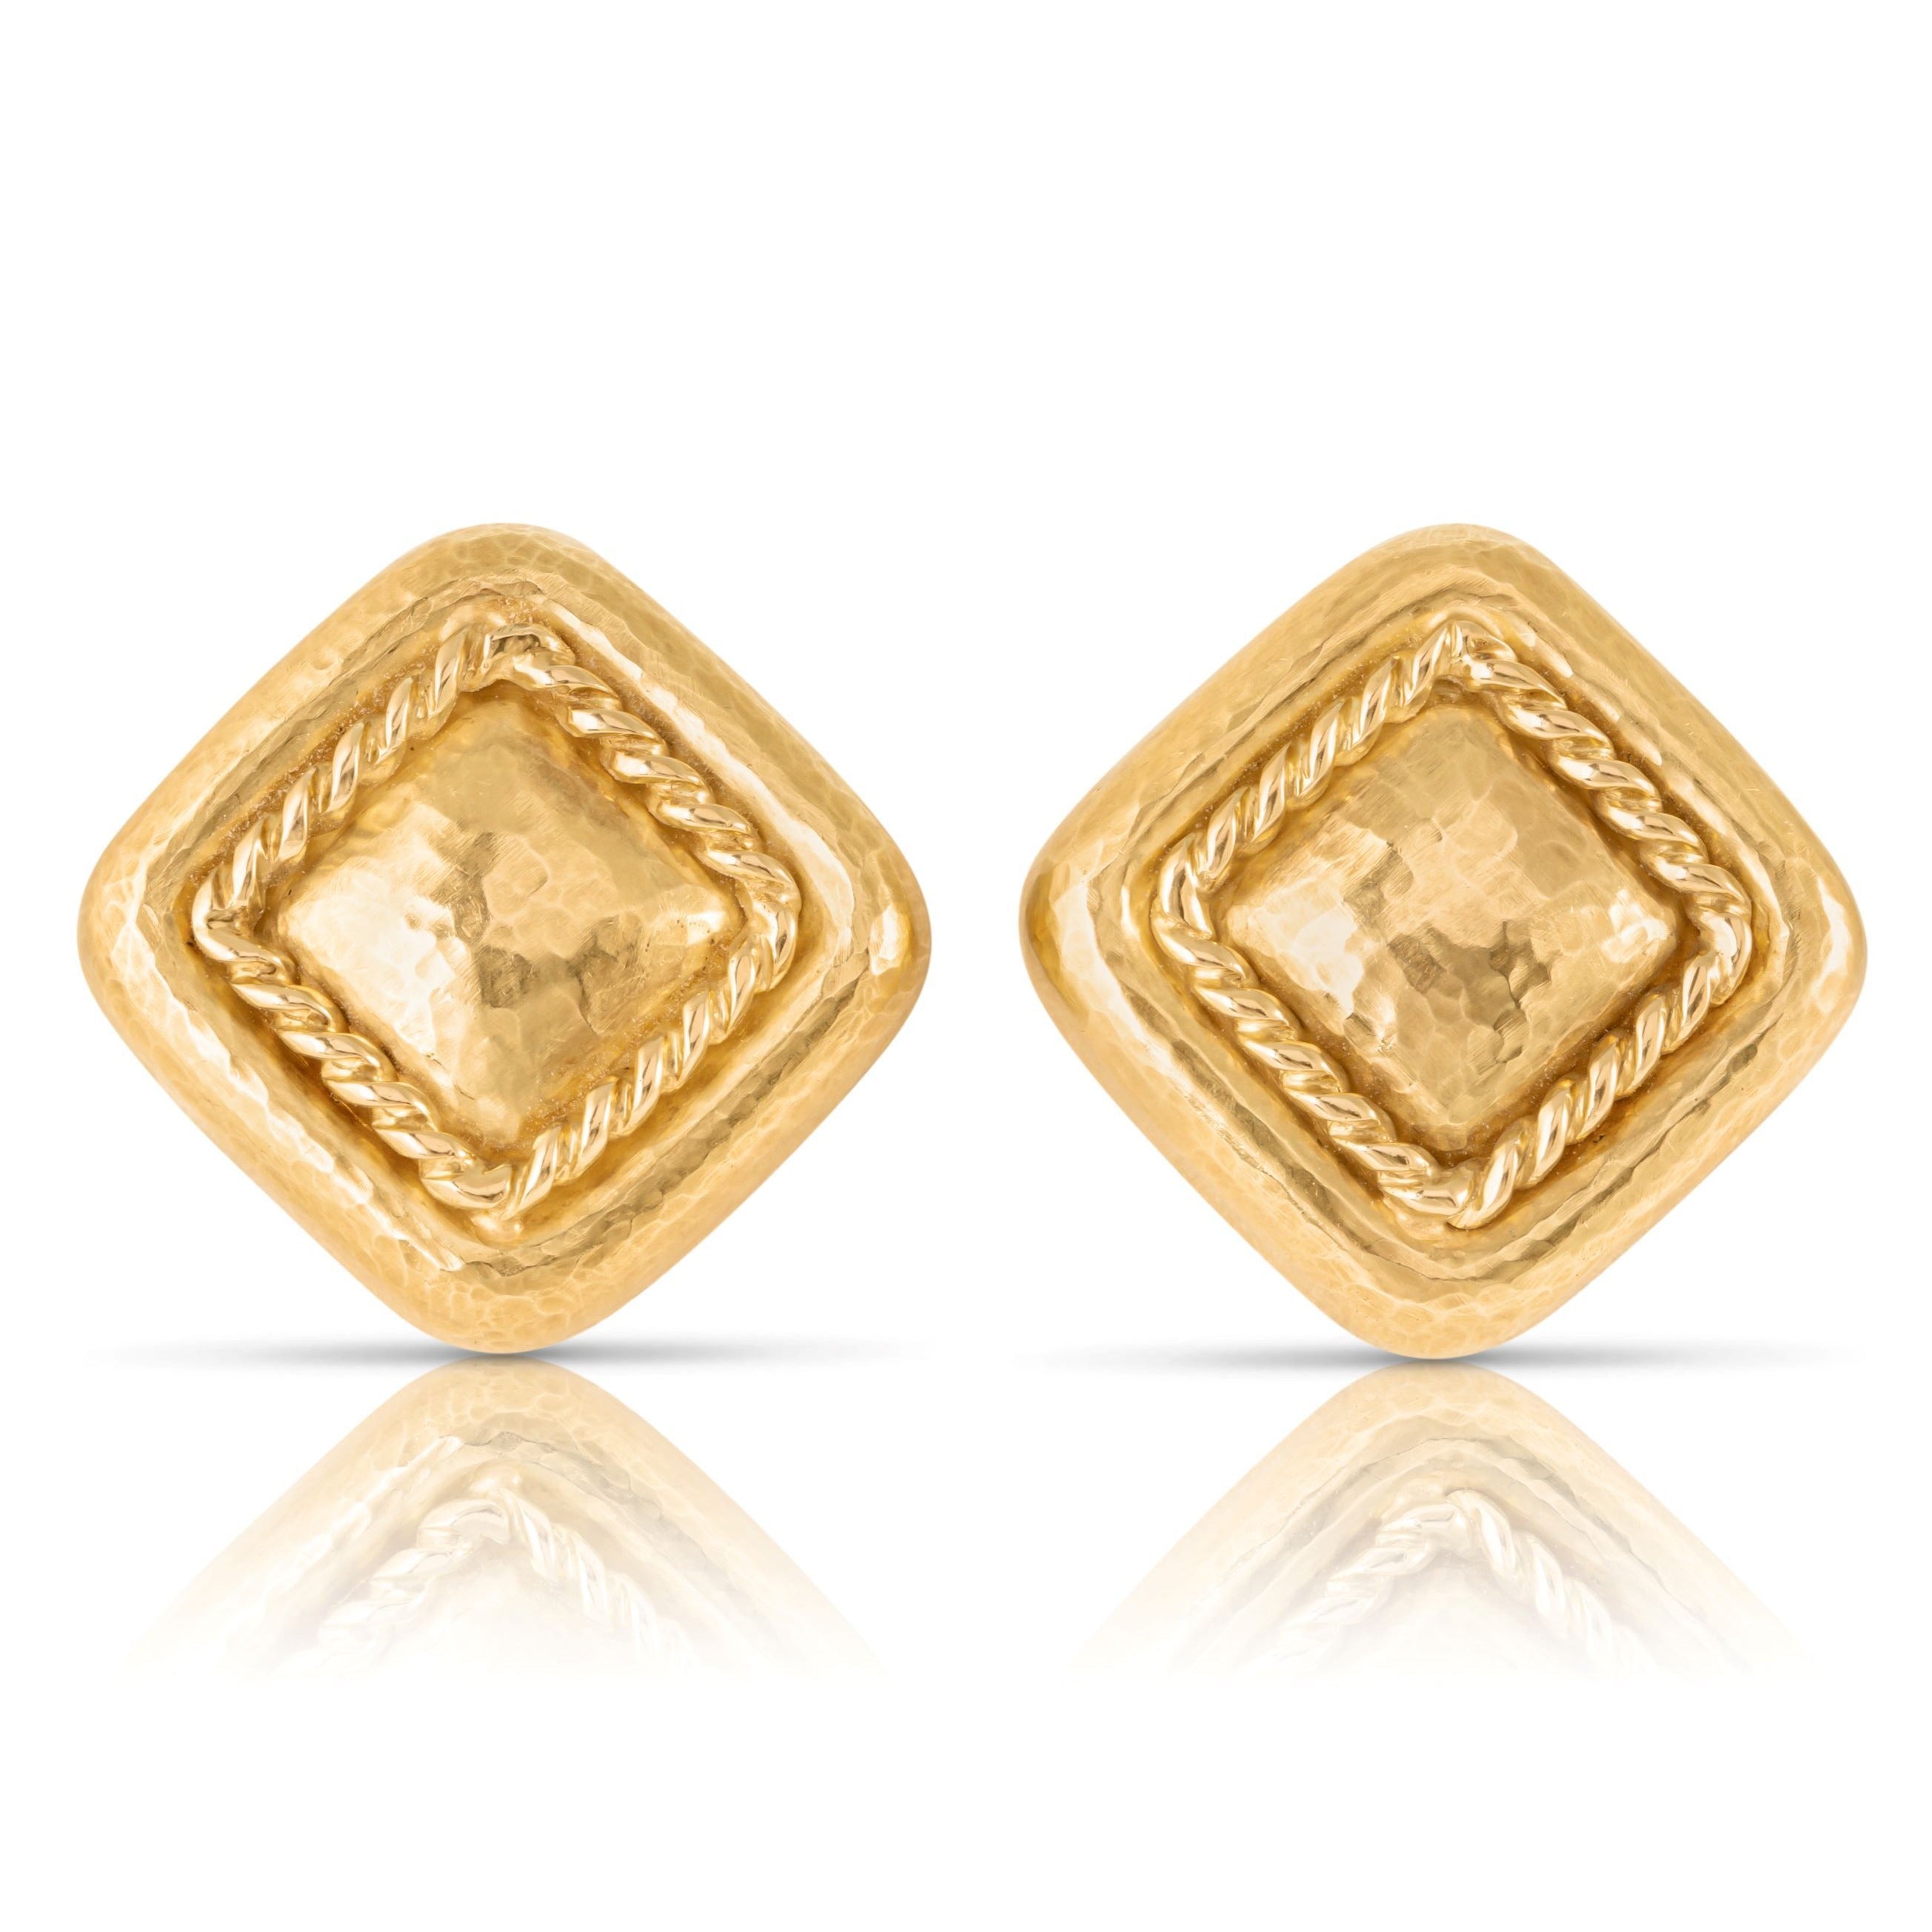 Contemporary 18K Hammered Geometric Earrings